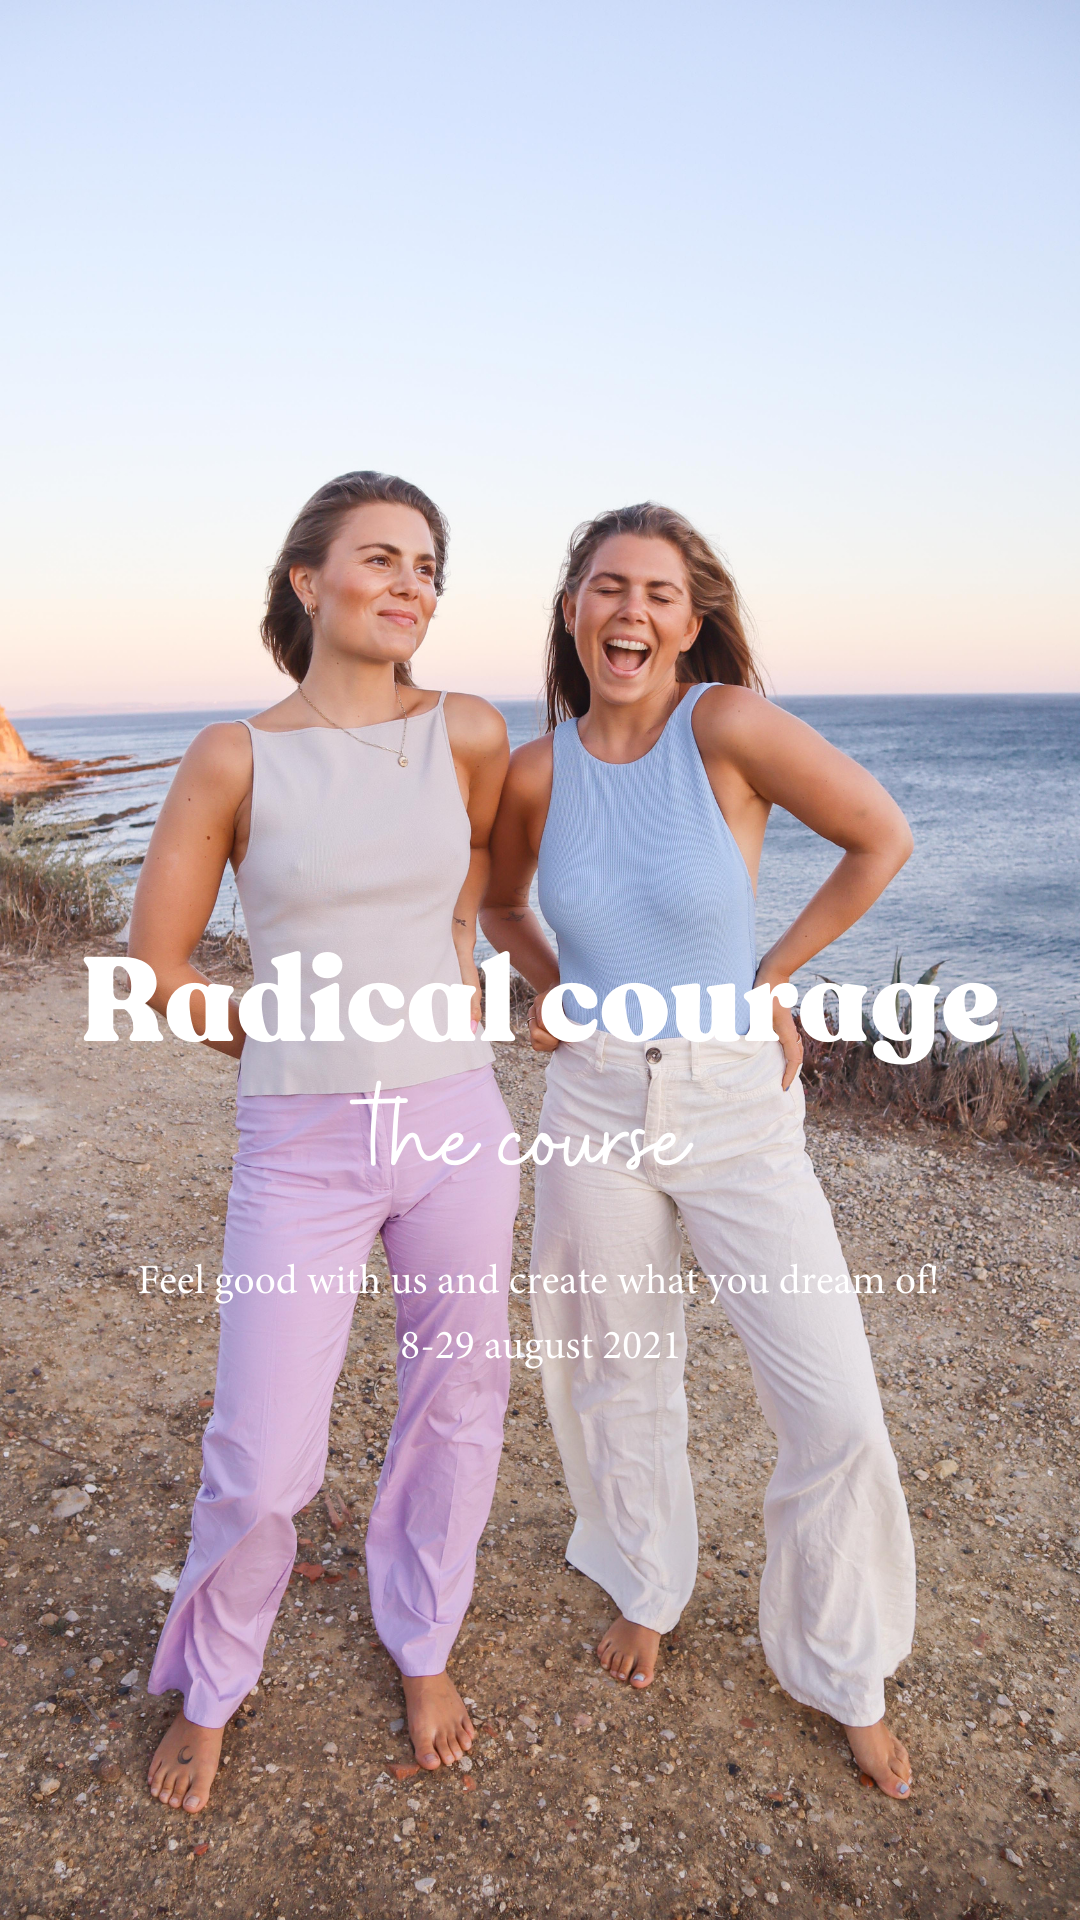 Radical Courage - the course